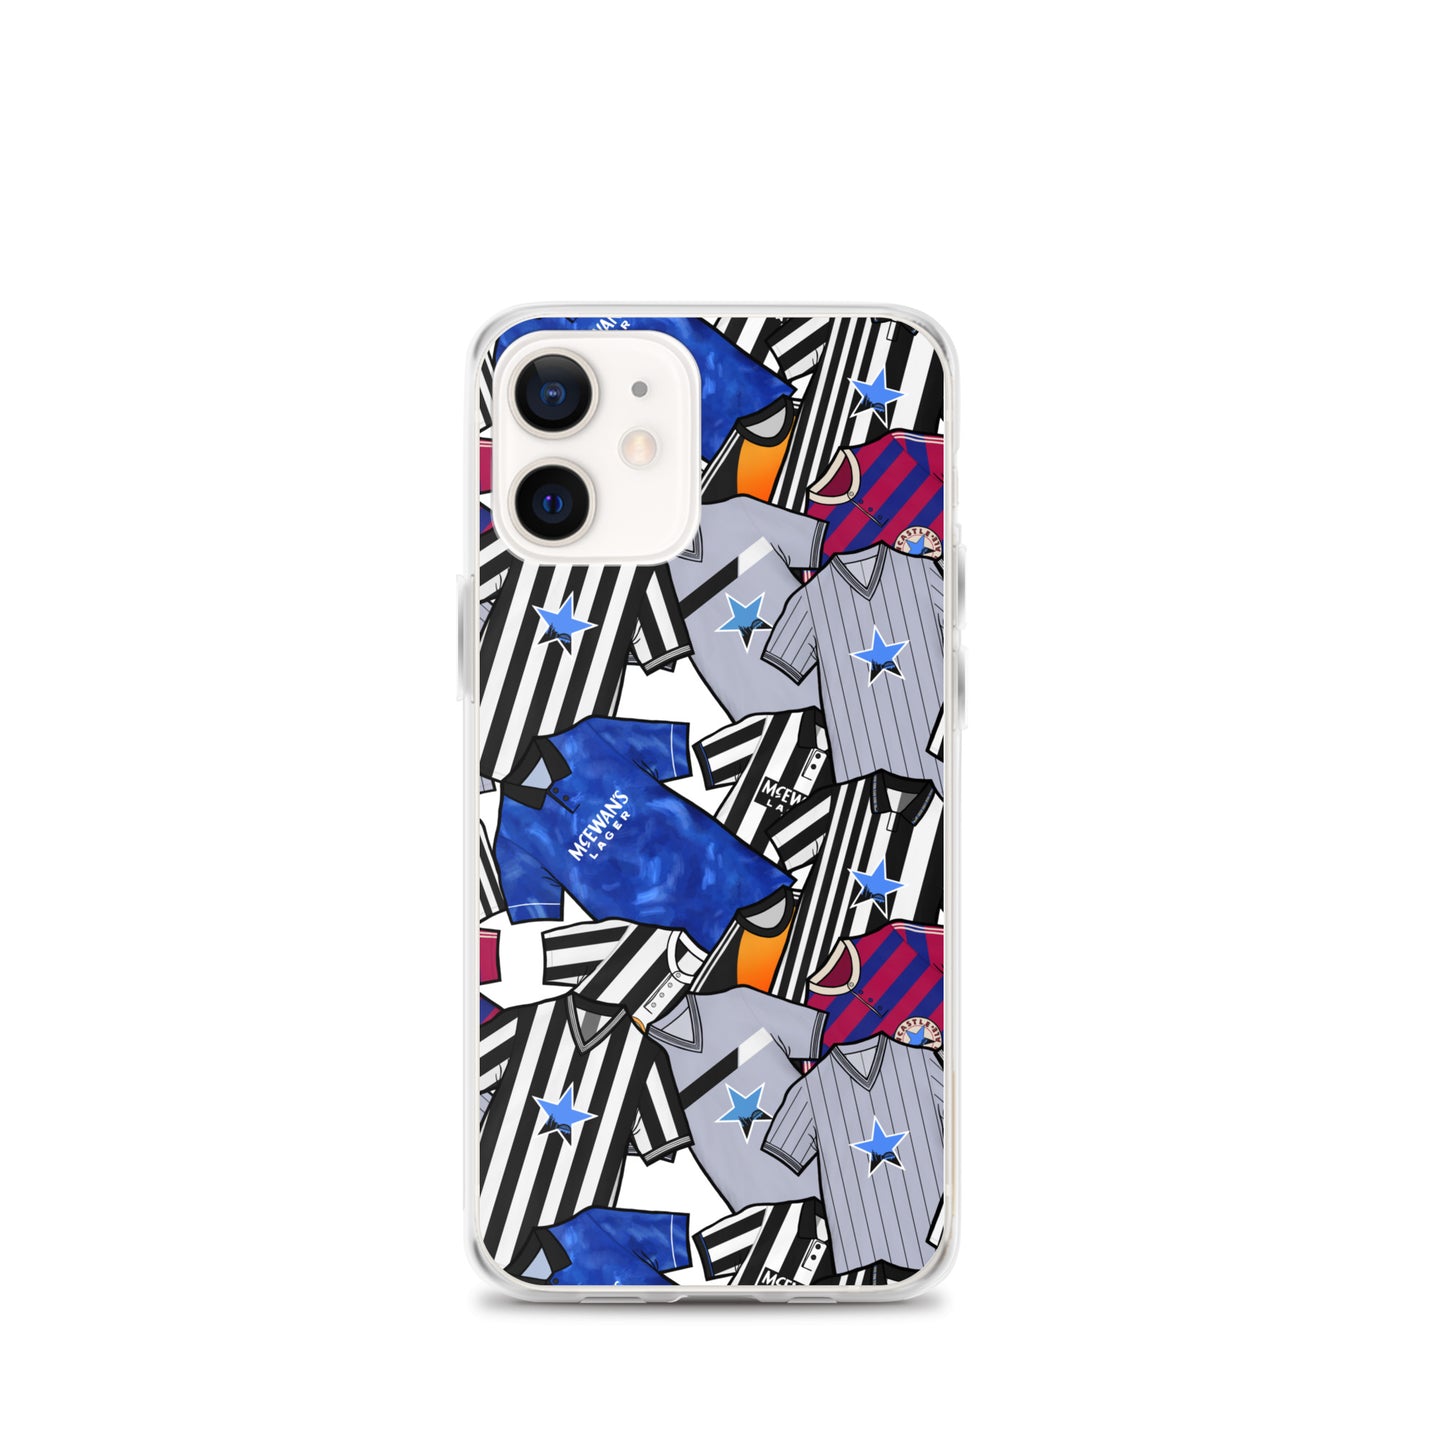 Phone case for iPhone 12 mini inspired by the Retro shirts of Newcastle United!